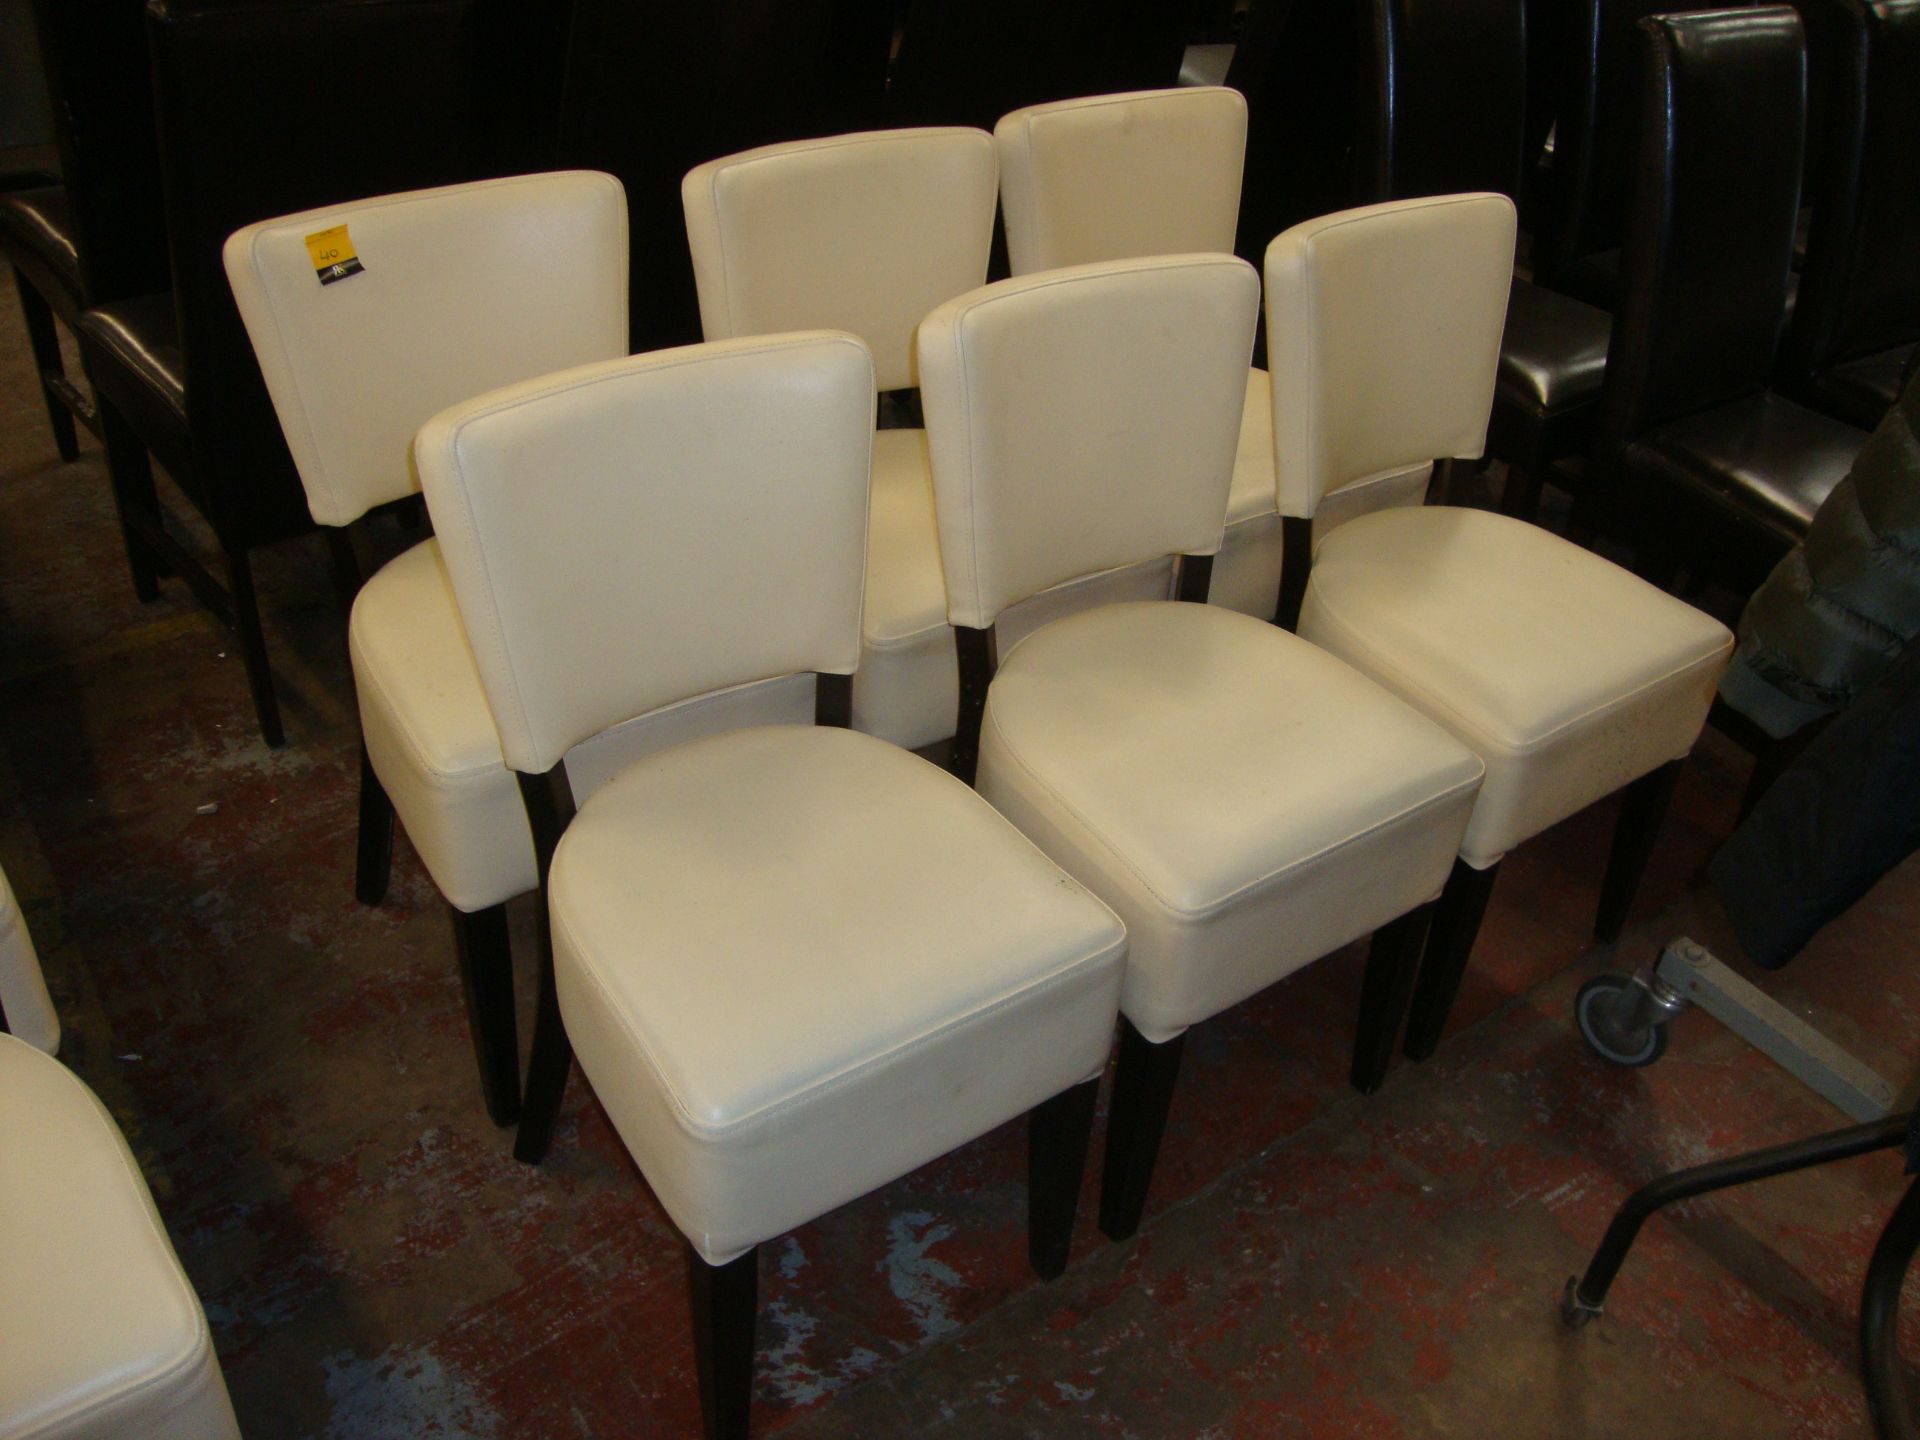 6 off cream upholstered chairs in leather/leather look on dark brown legs. NB lots 35 - 40 each